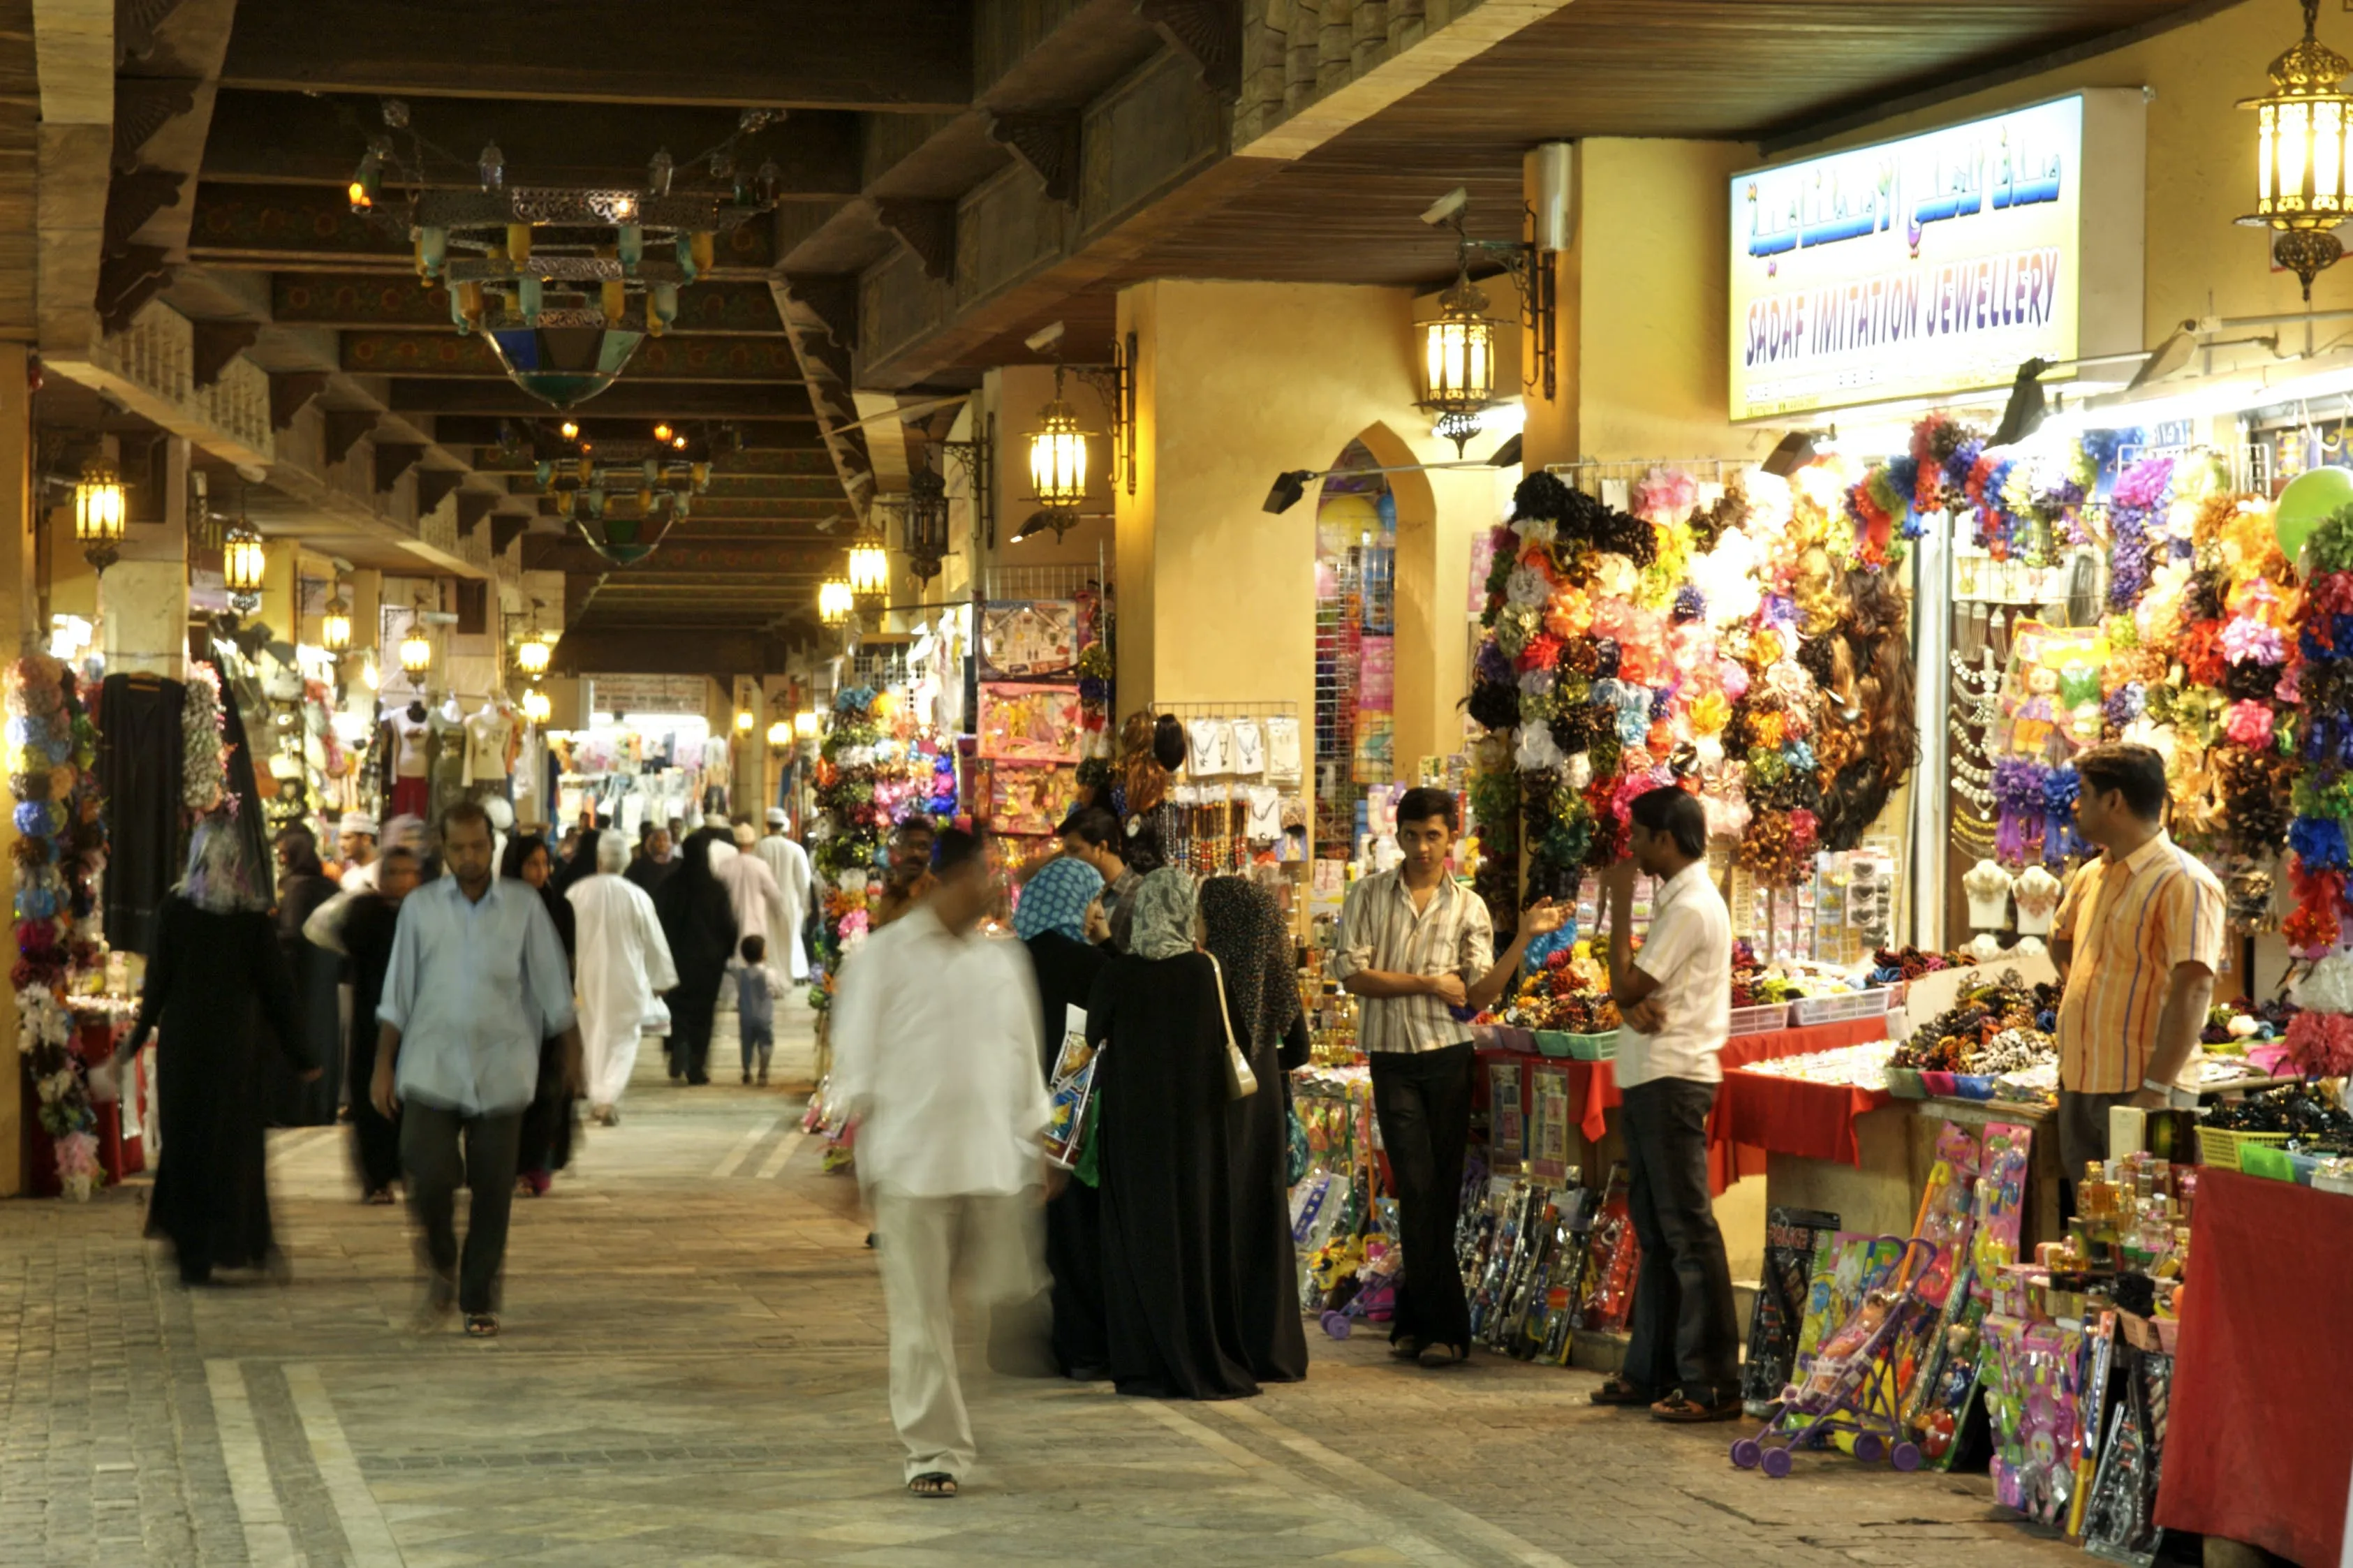 Mutrah Souq in Oman, middle_east | Handbags,Accessories,Groceries,Clothes,Handicrafts,Home Decor,Art - Country Helper